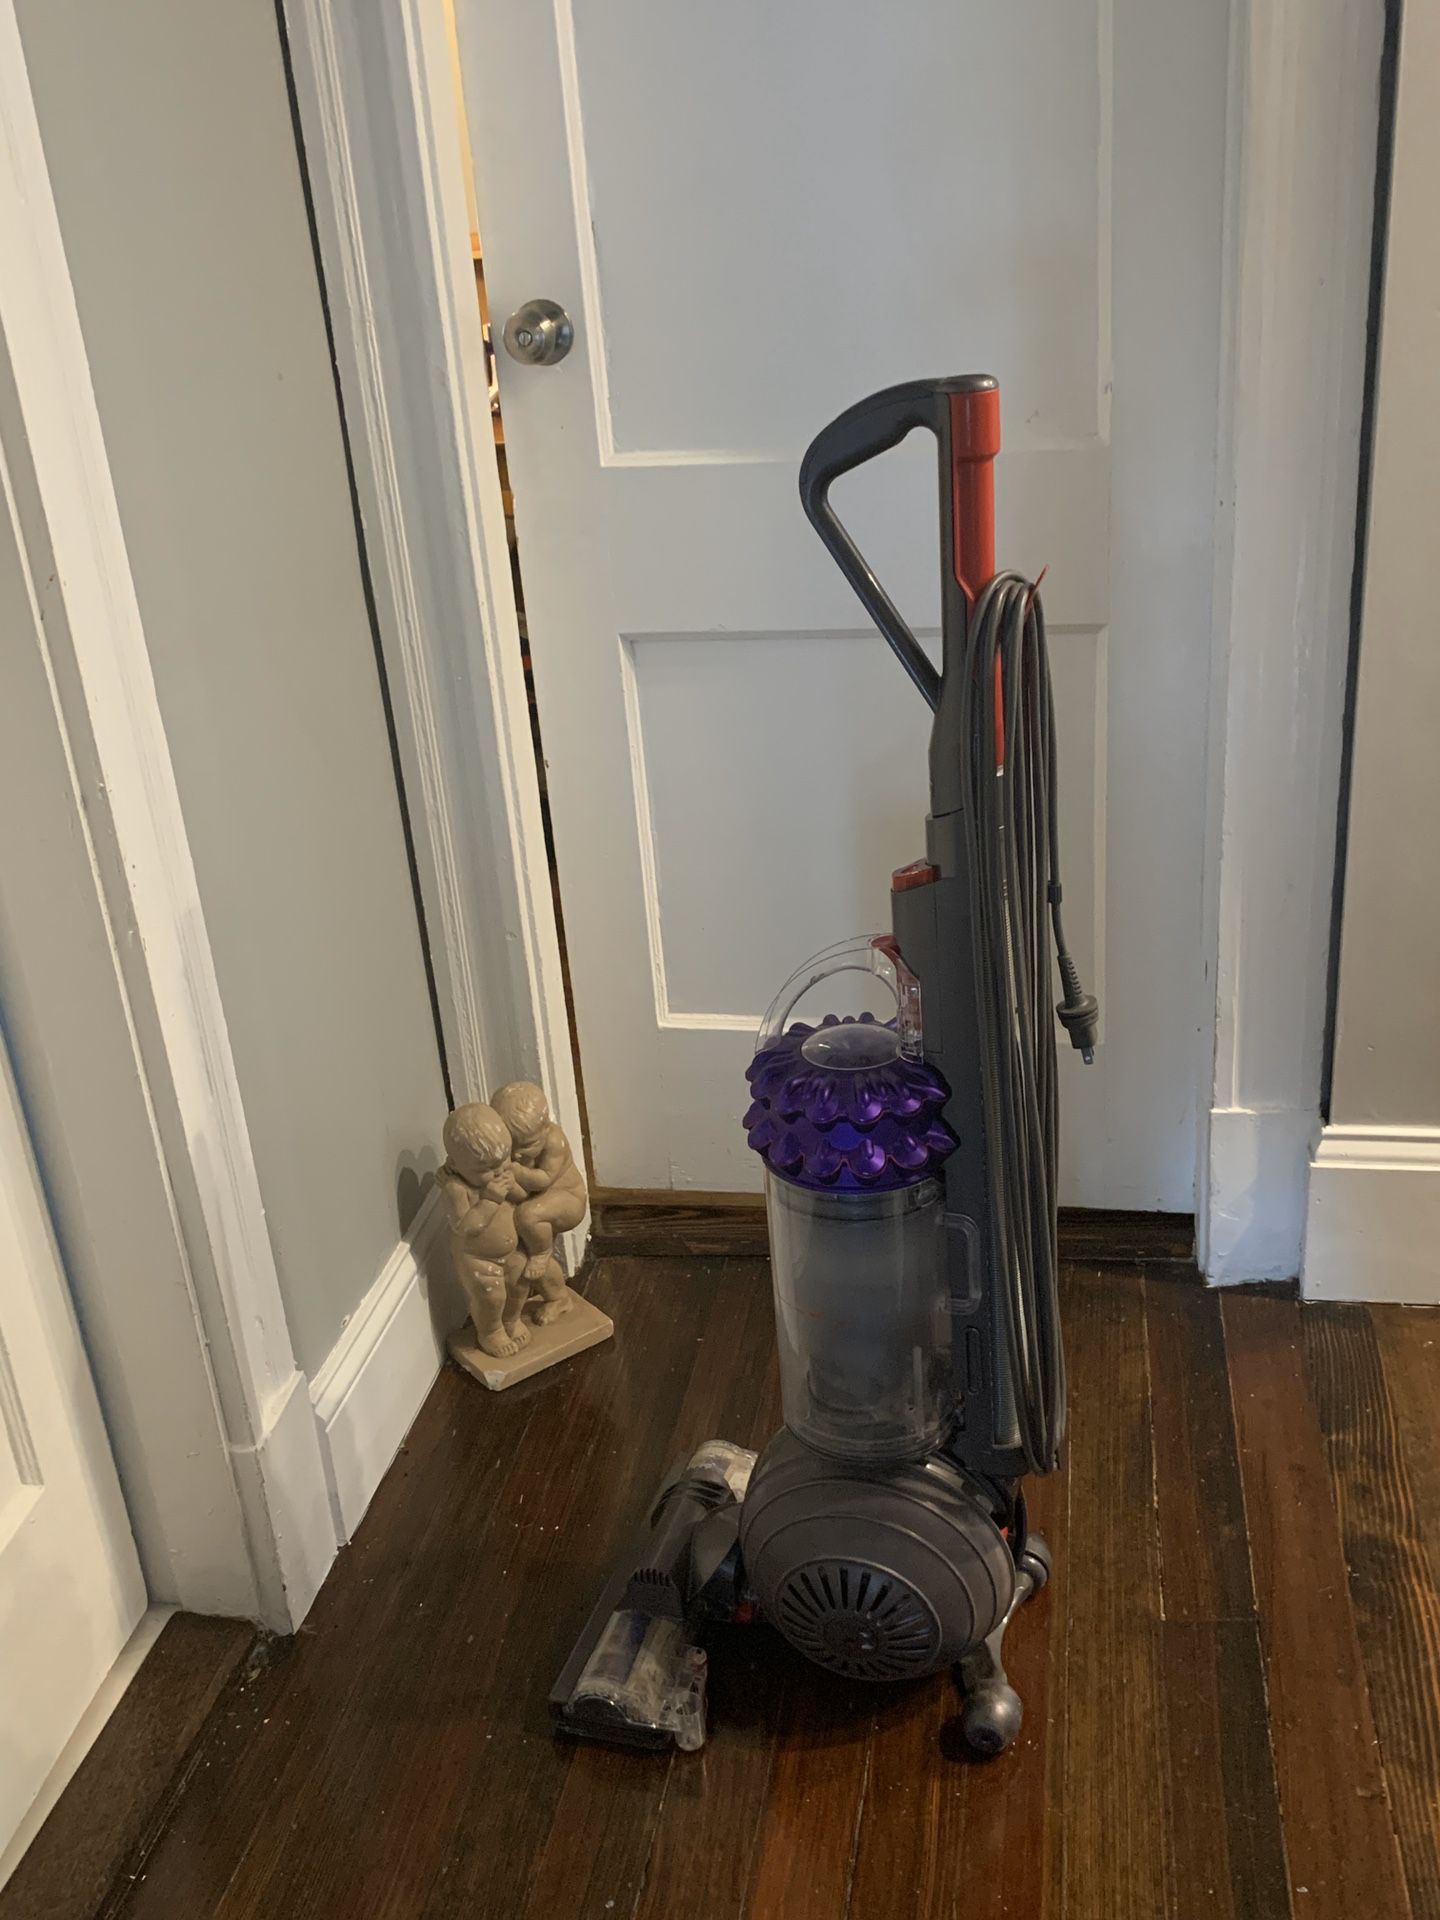 Dyson Ball Animal2 Vacuum with all attachments